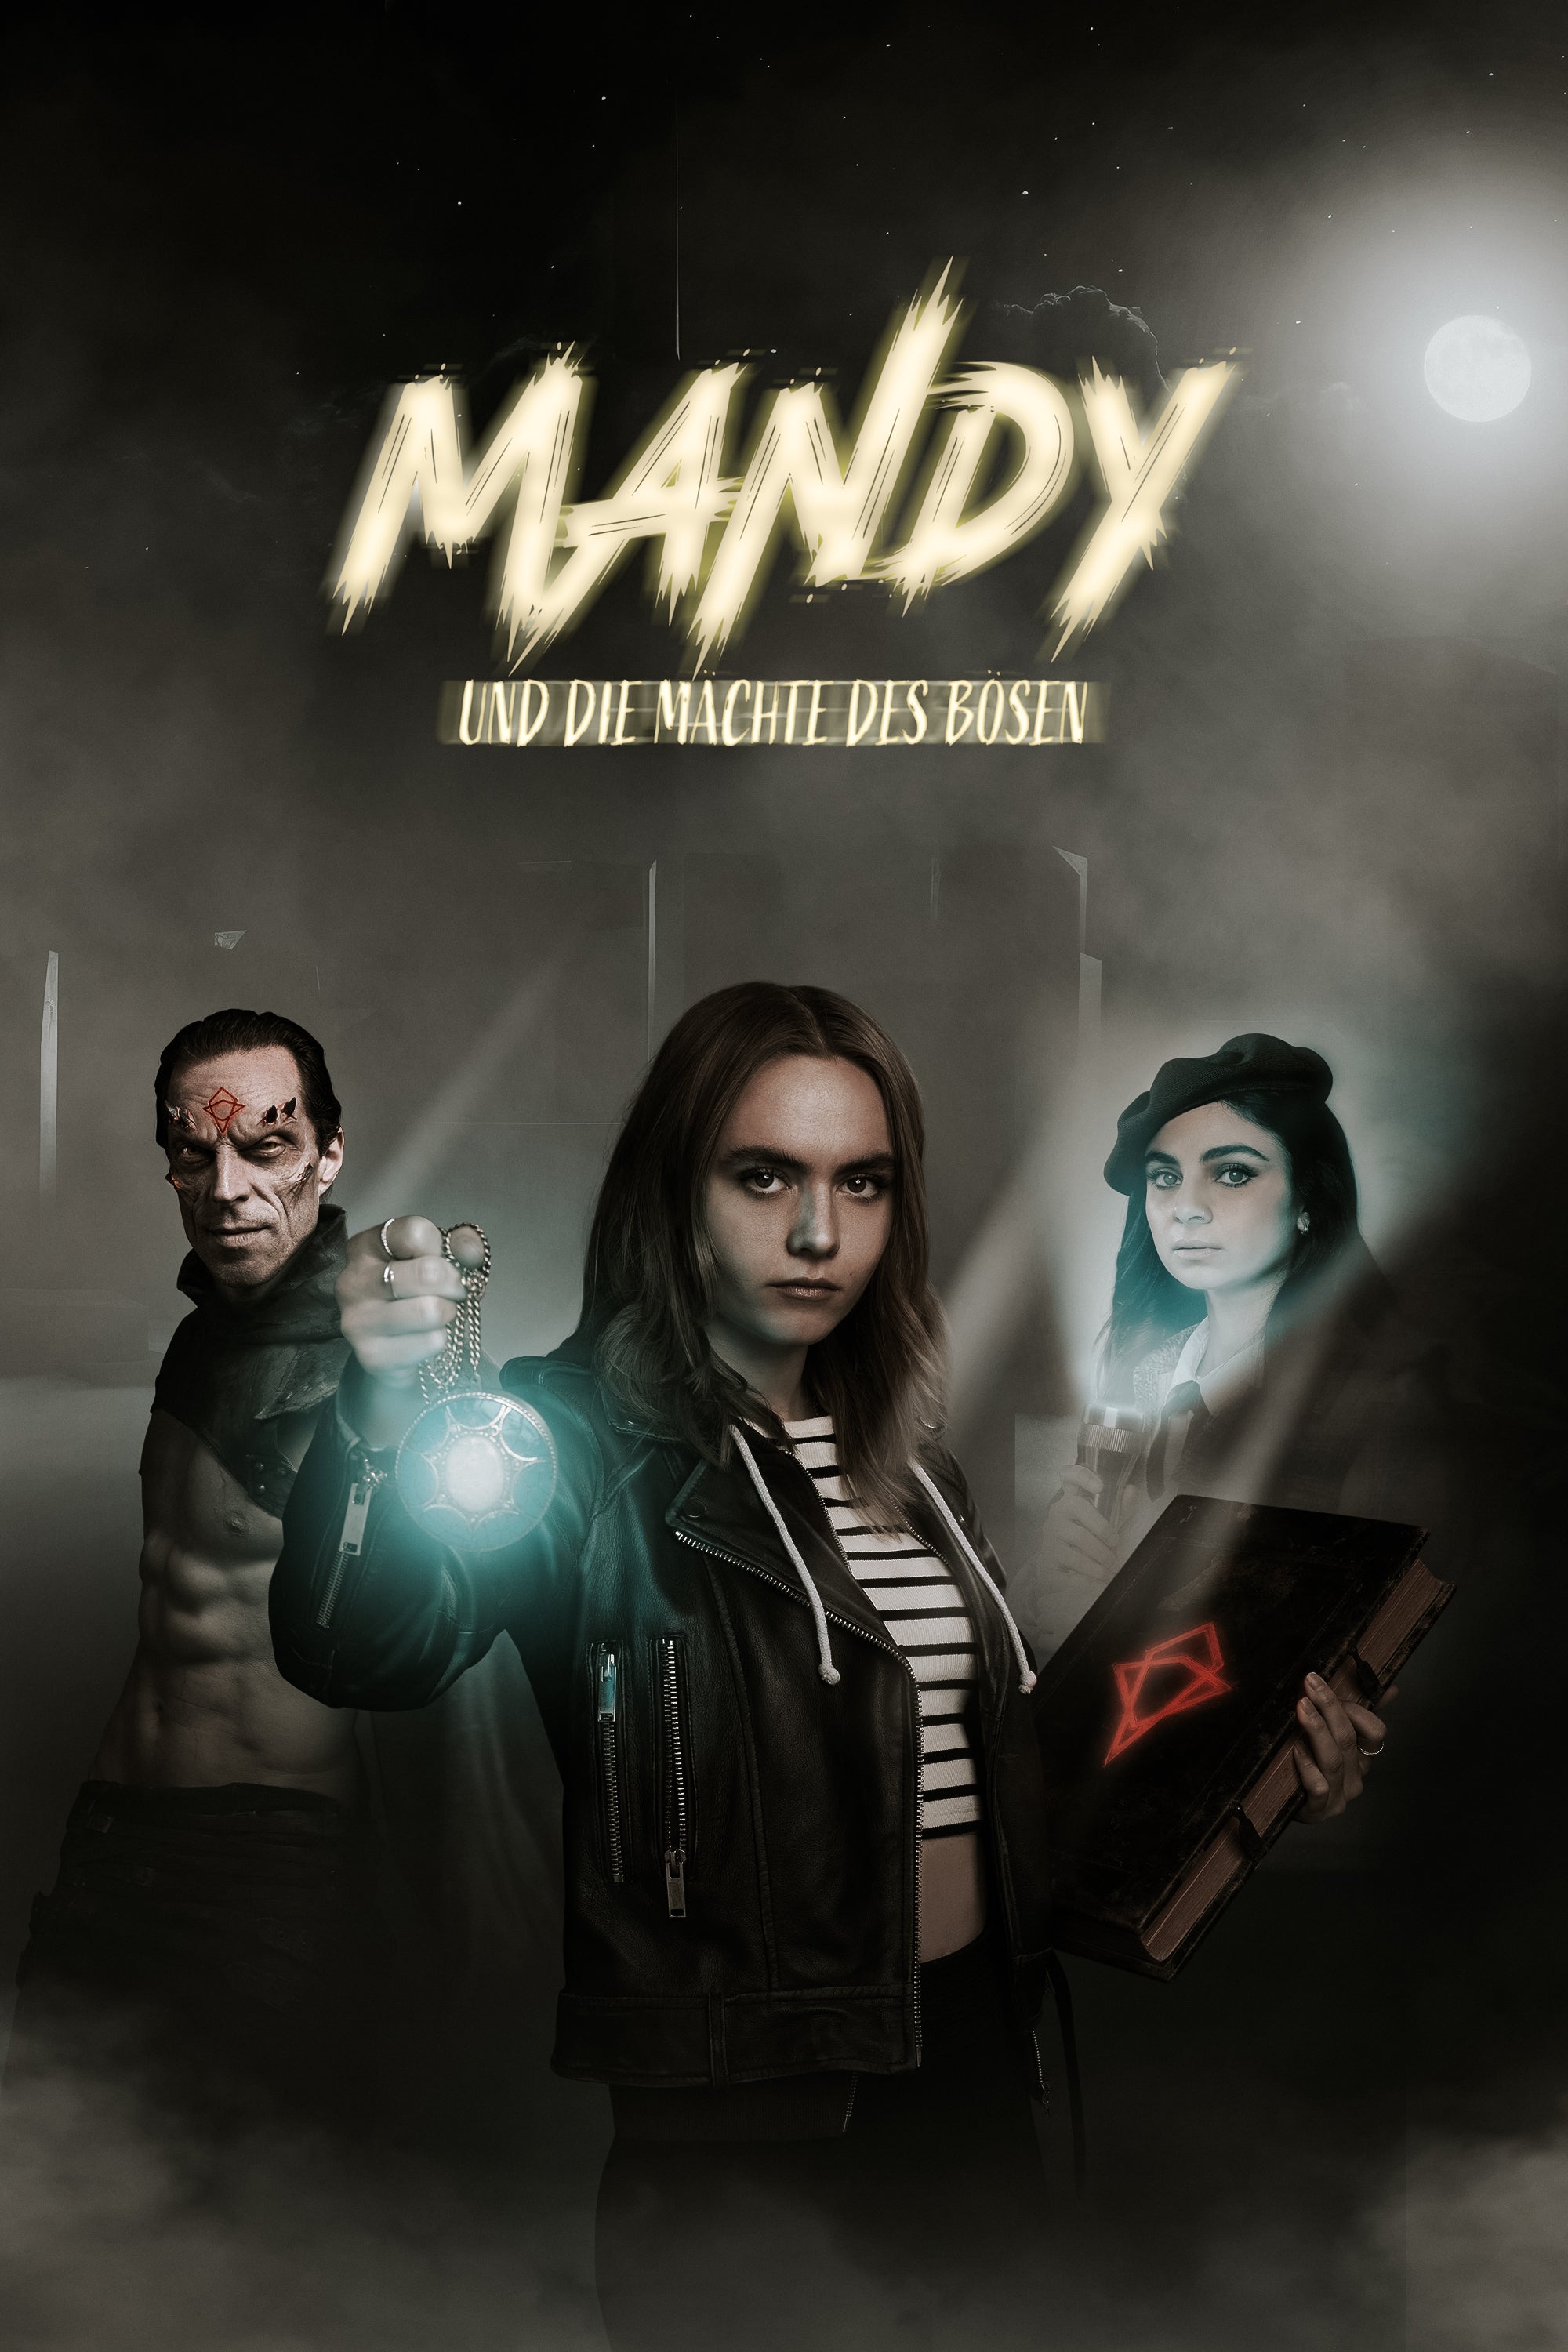 TV ratings for Mandy And The Forces Of Evil (Mandy Und Die Mächte Des Bösen) in Mexico. Amazon Prime Video TV series